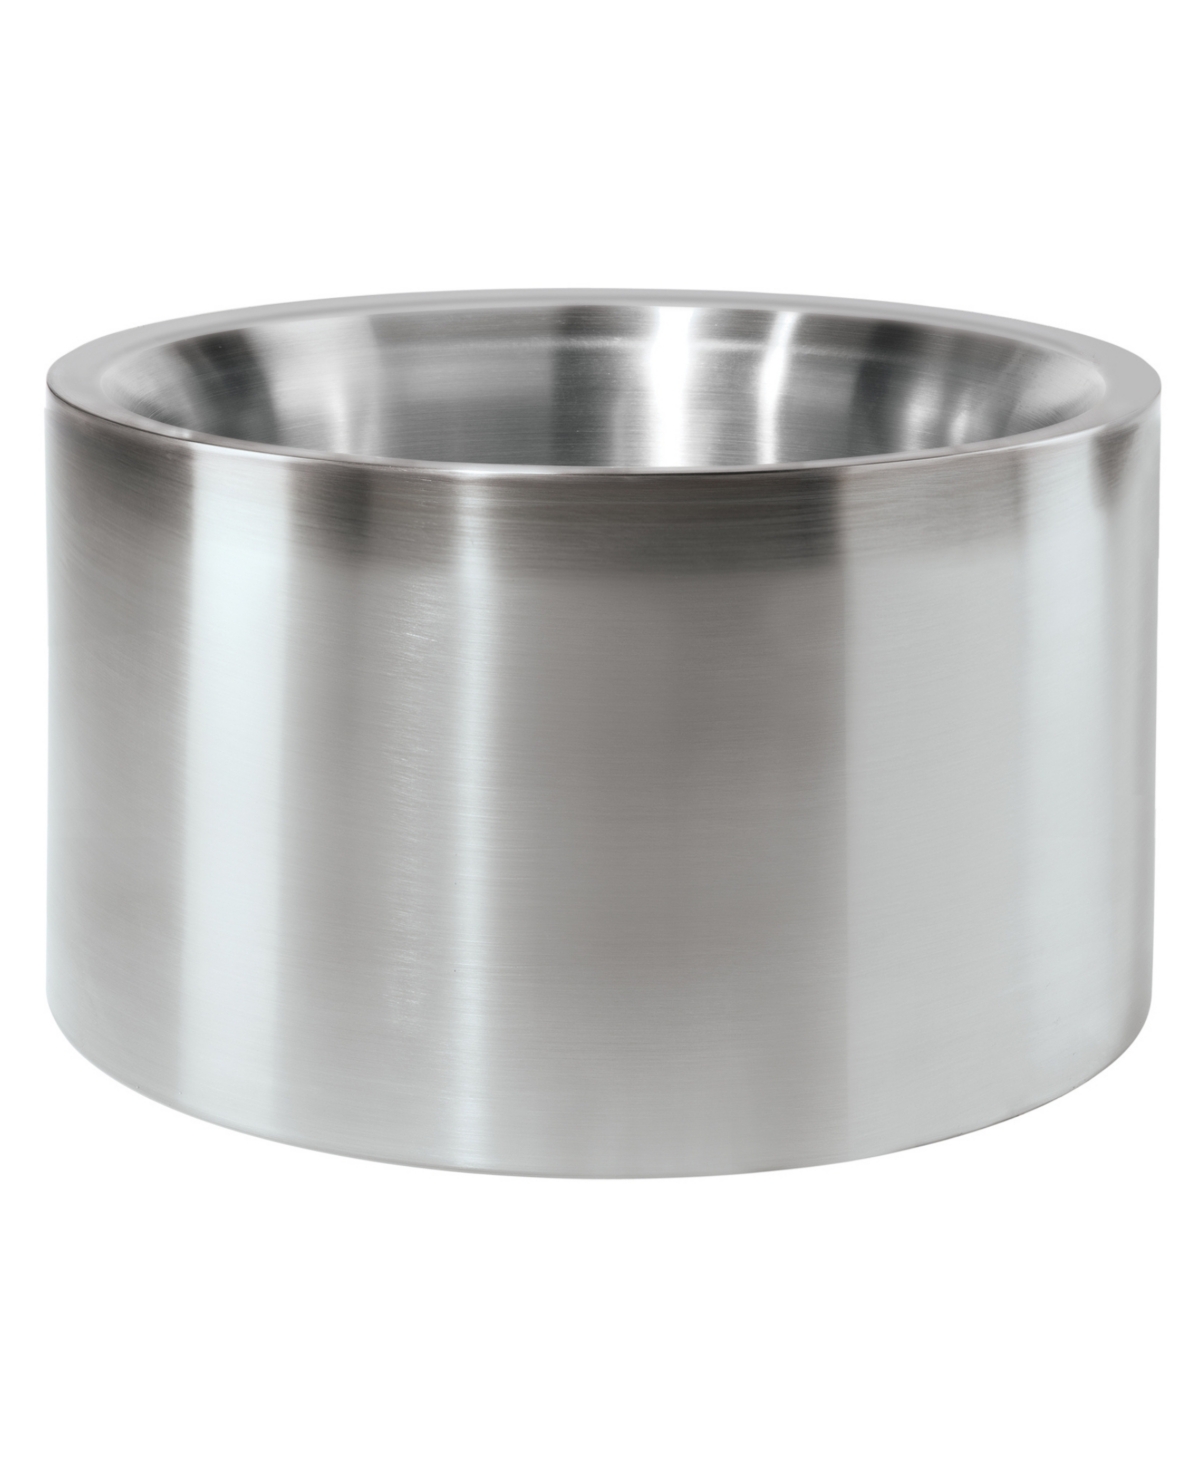 Oggi 9.75" Party Tub In Stainless Steel